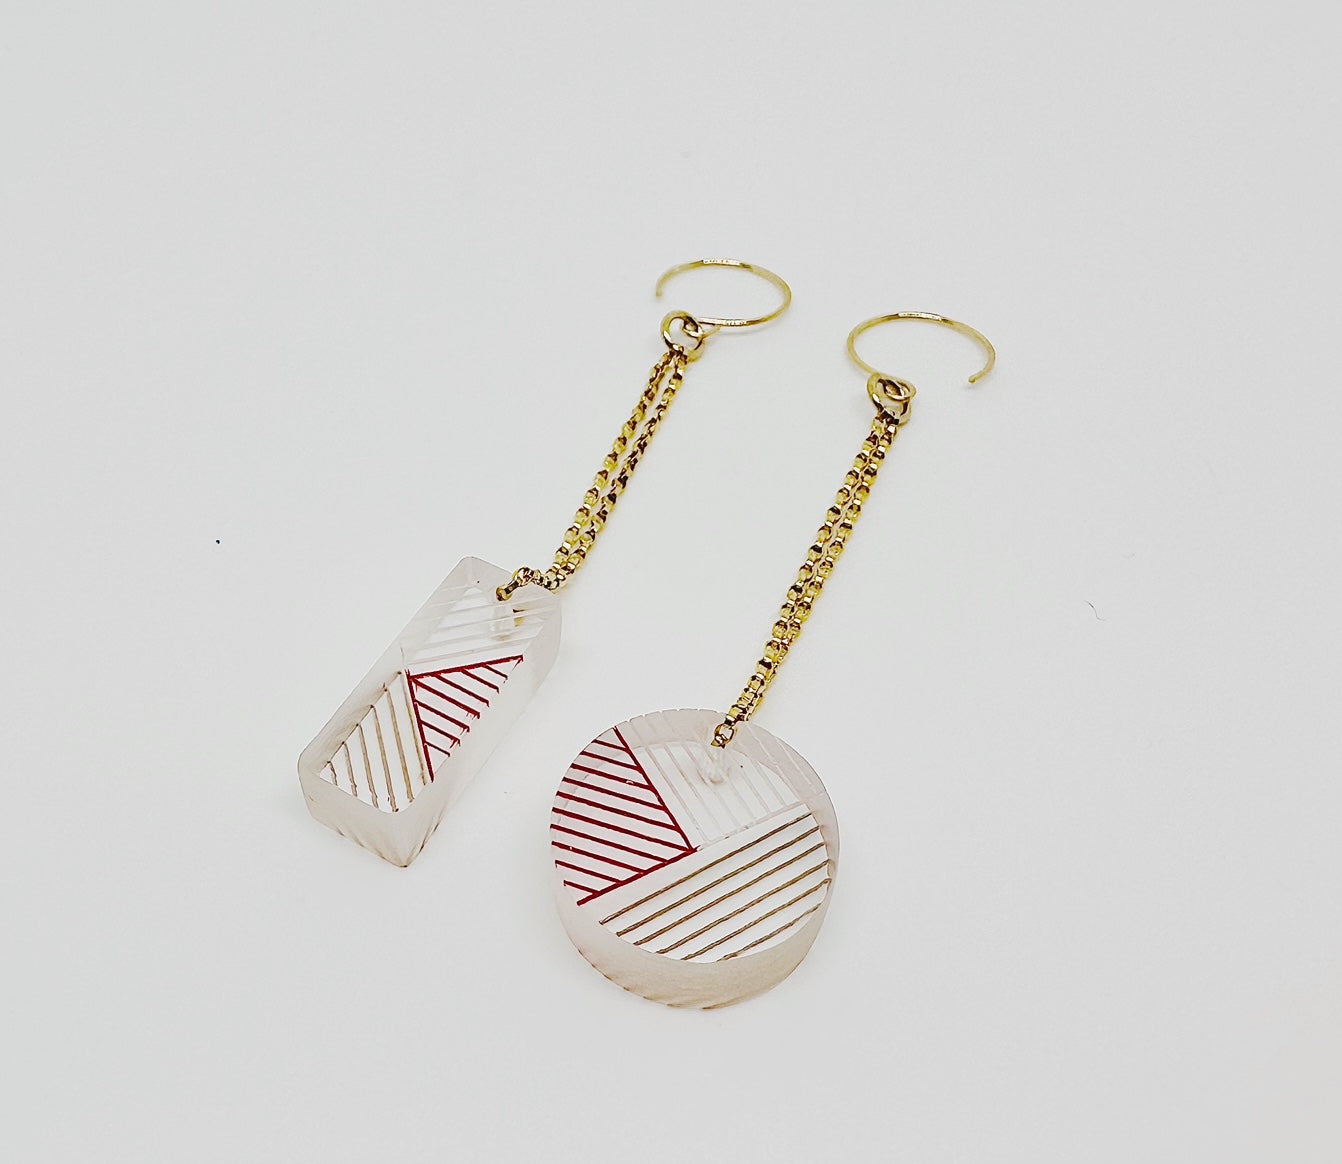 Osa/Oda Earrings (Mis-Matched Geometric Dangle) - one set. Transparent handpainted acrylic, dangling from gold-fill {g} Rolo chain. Measure approximately .5” w x 3.5" l with chain. 